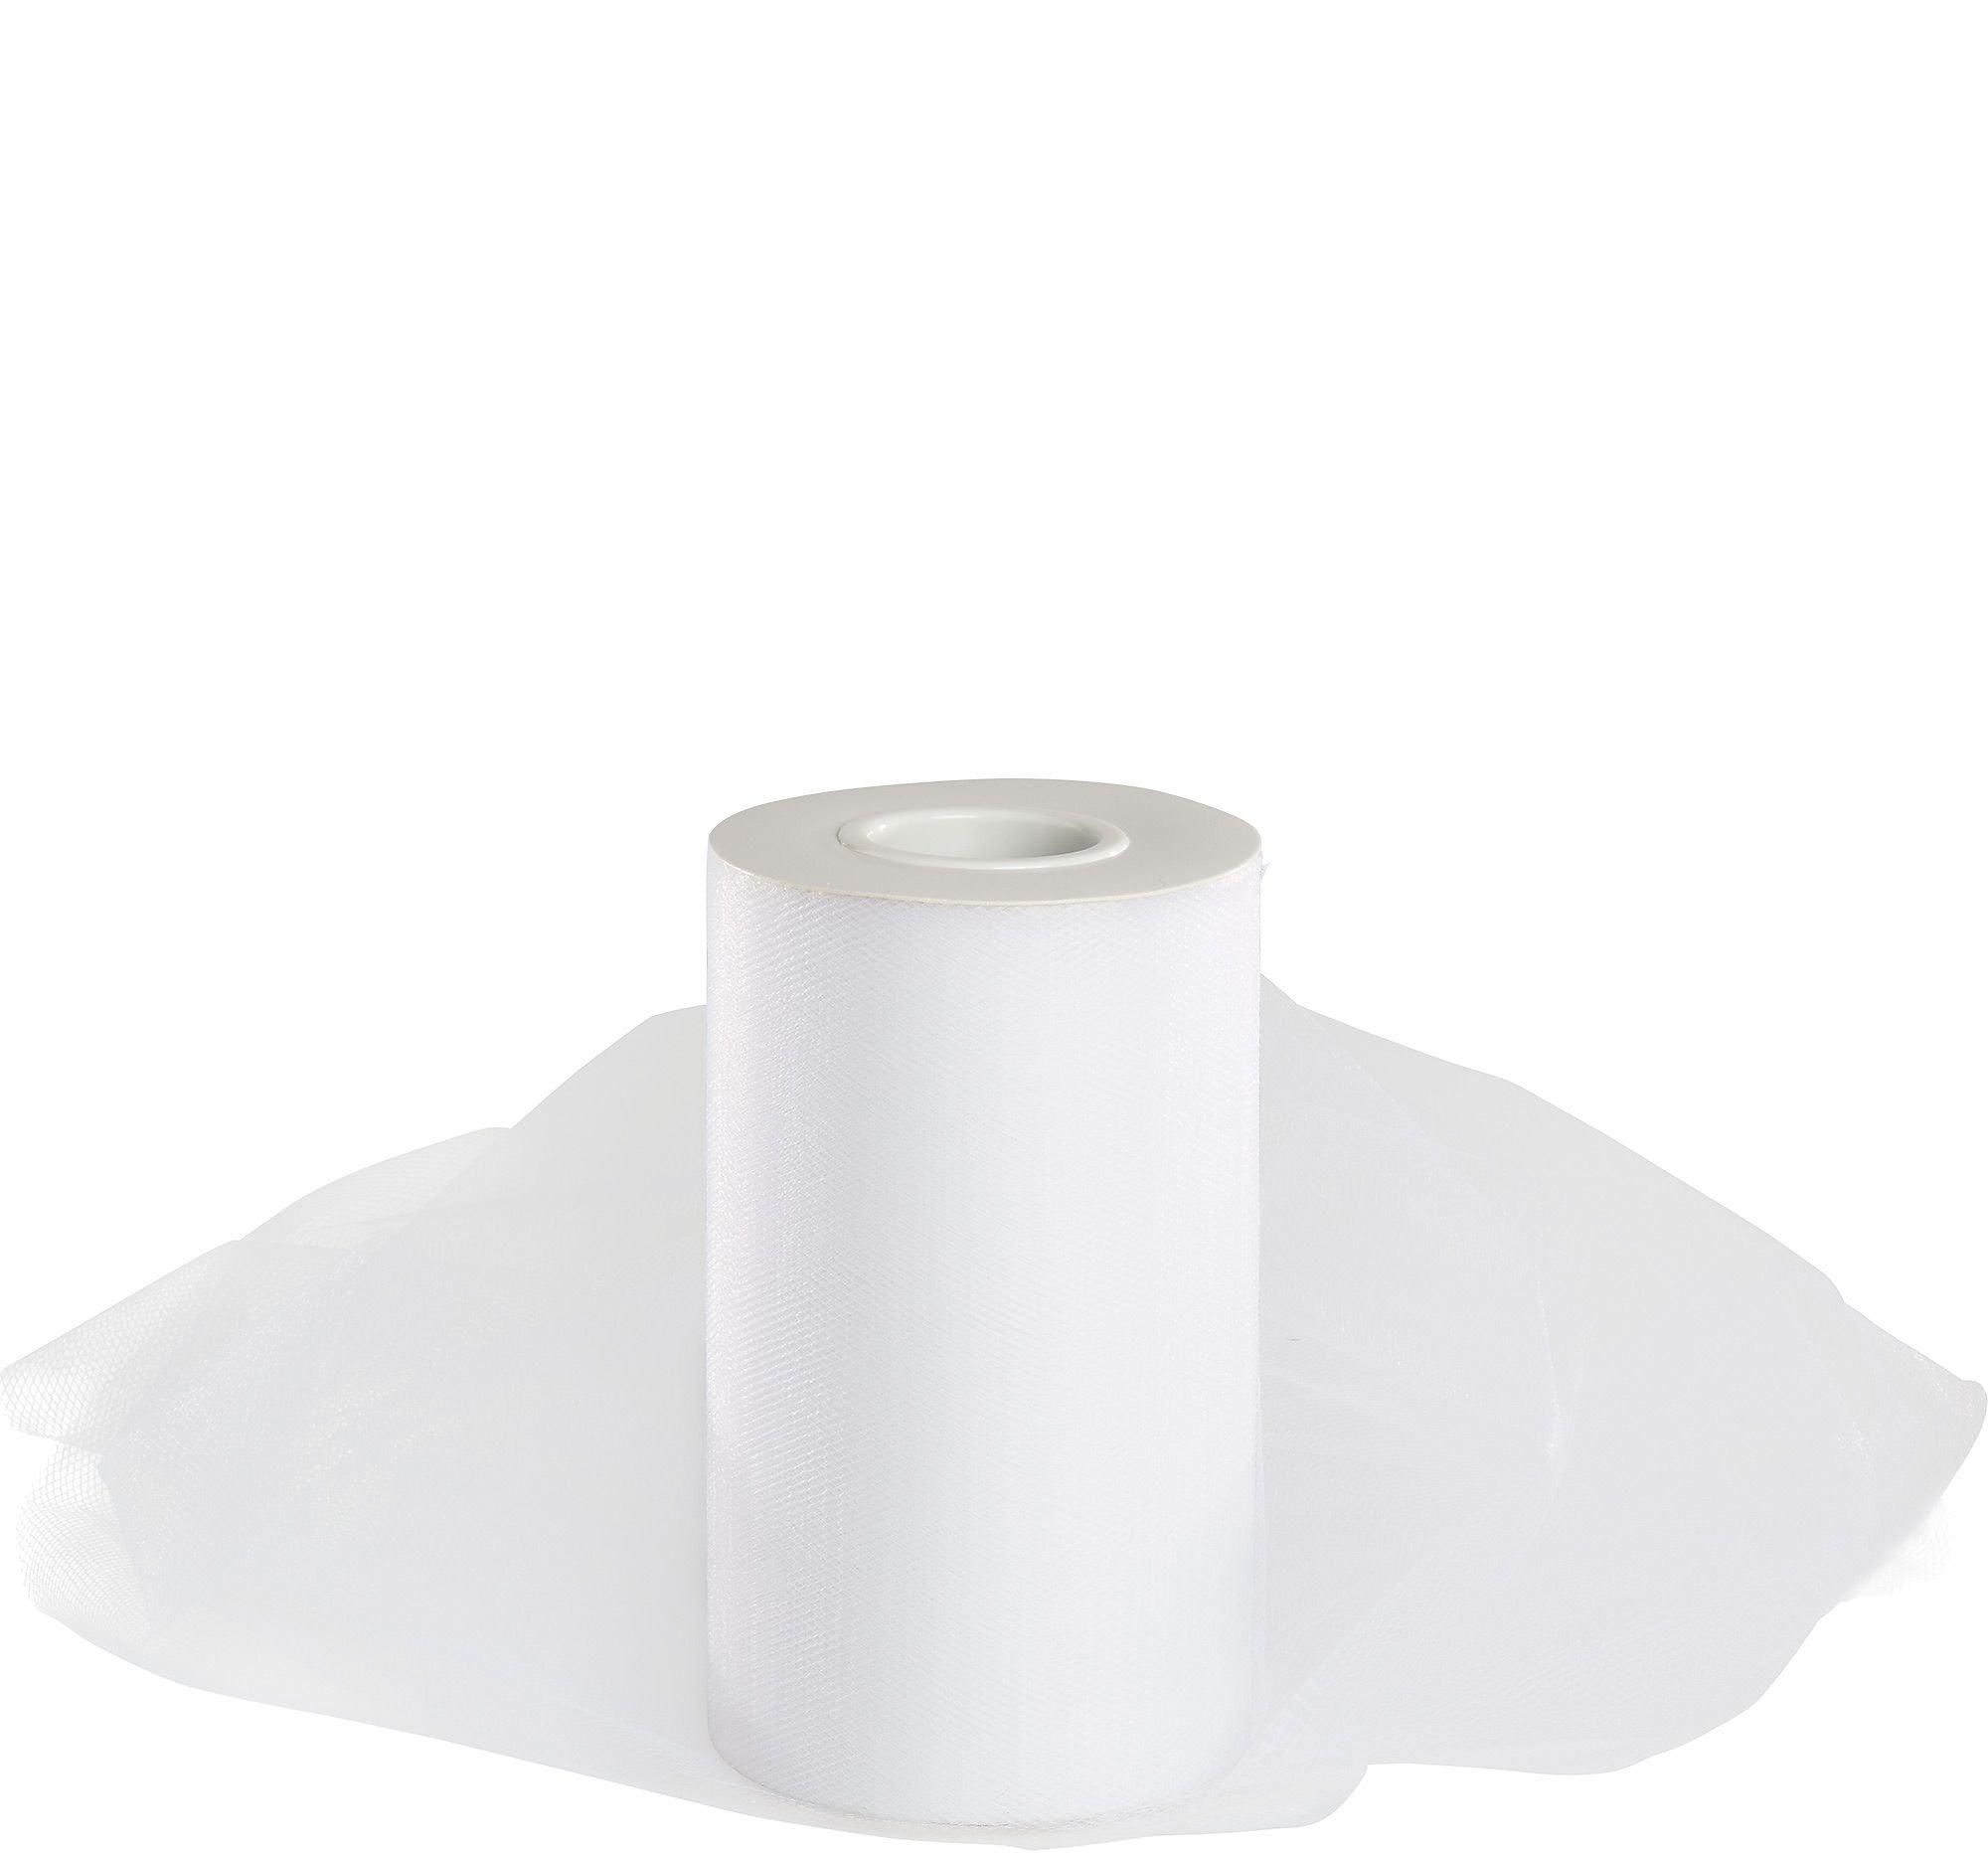 5 Wholesale Tulle Fabric Roll White - at 